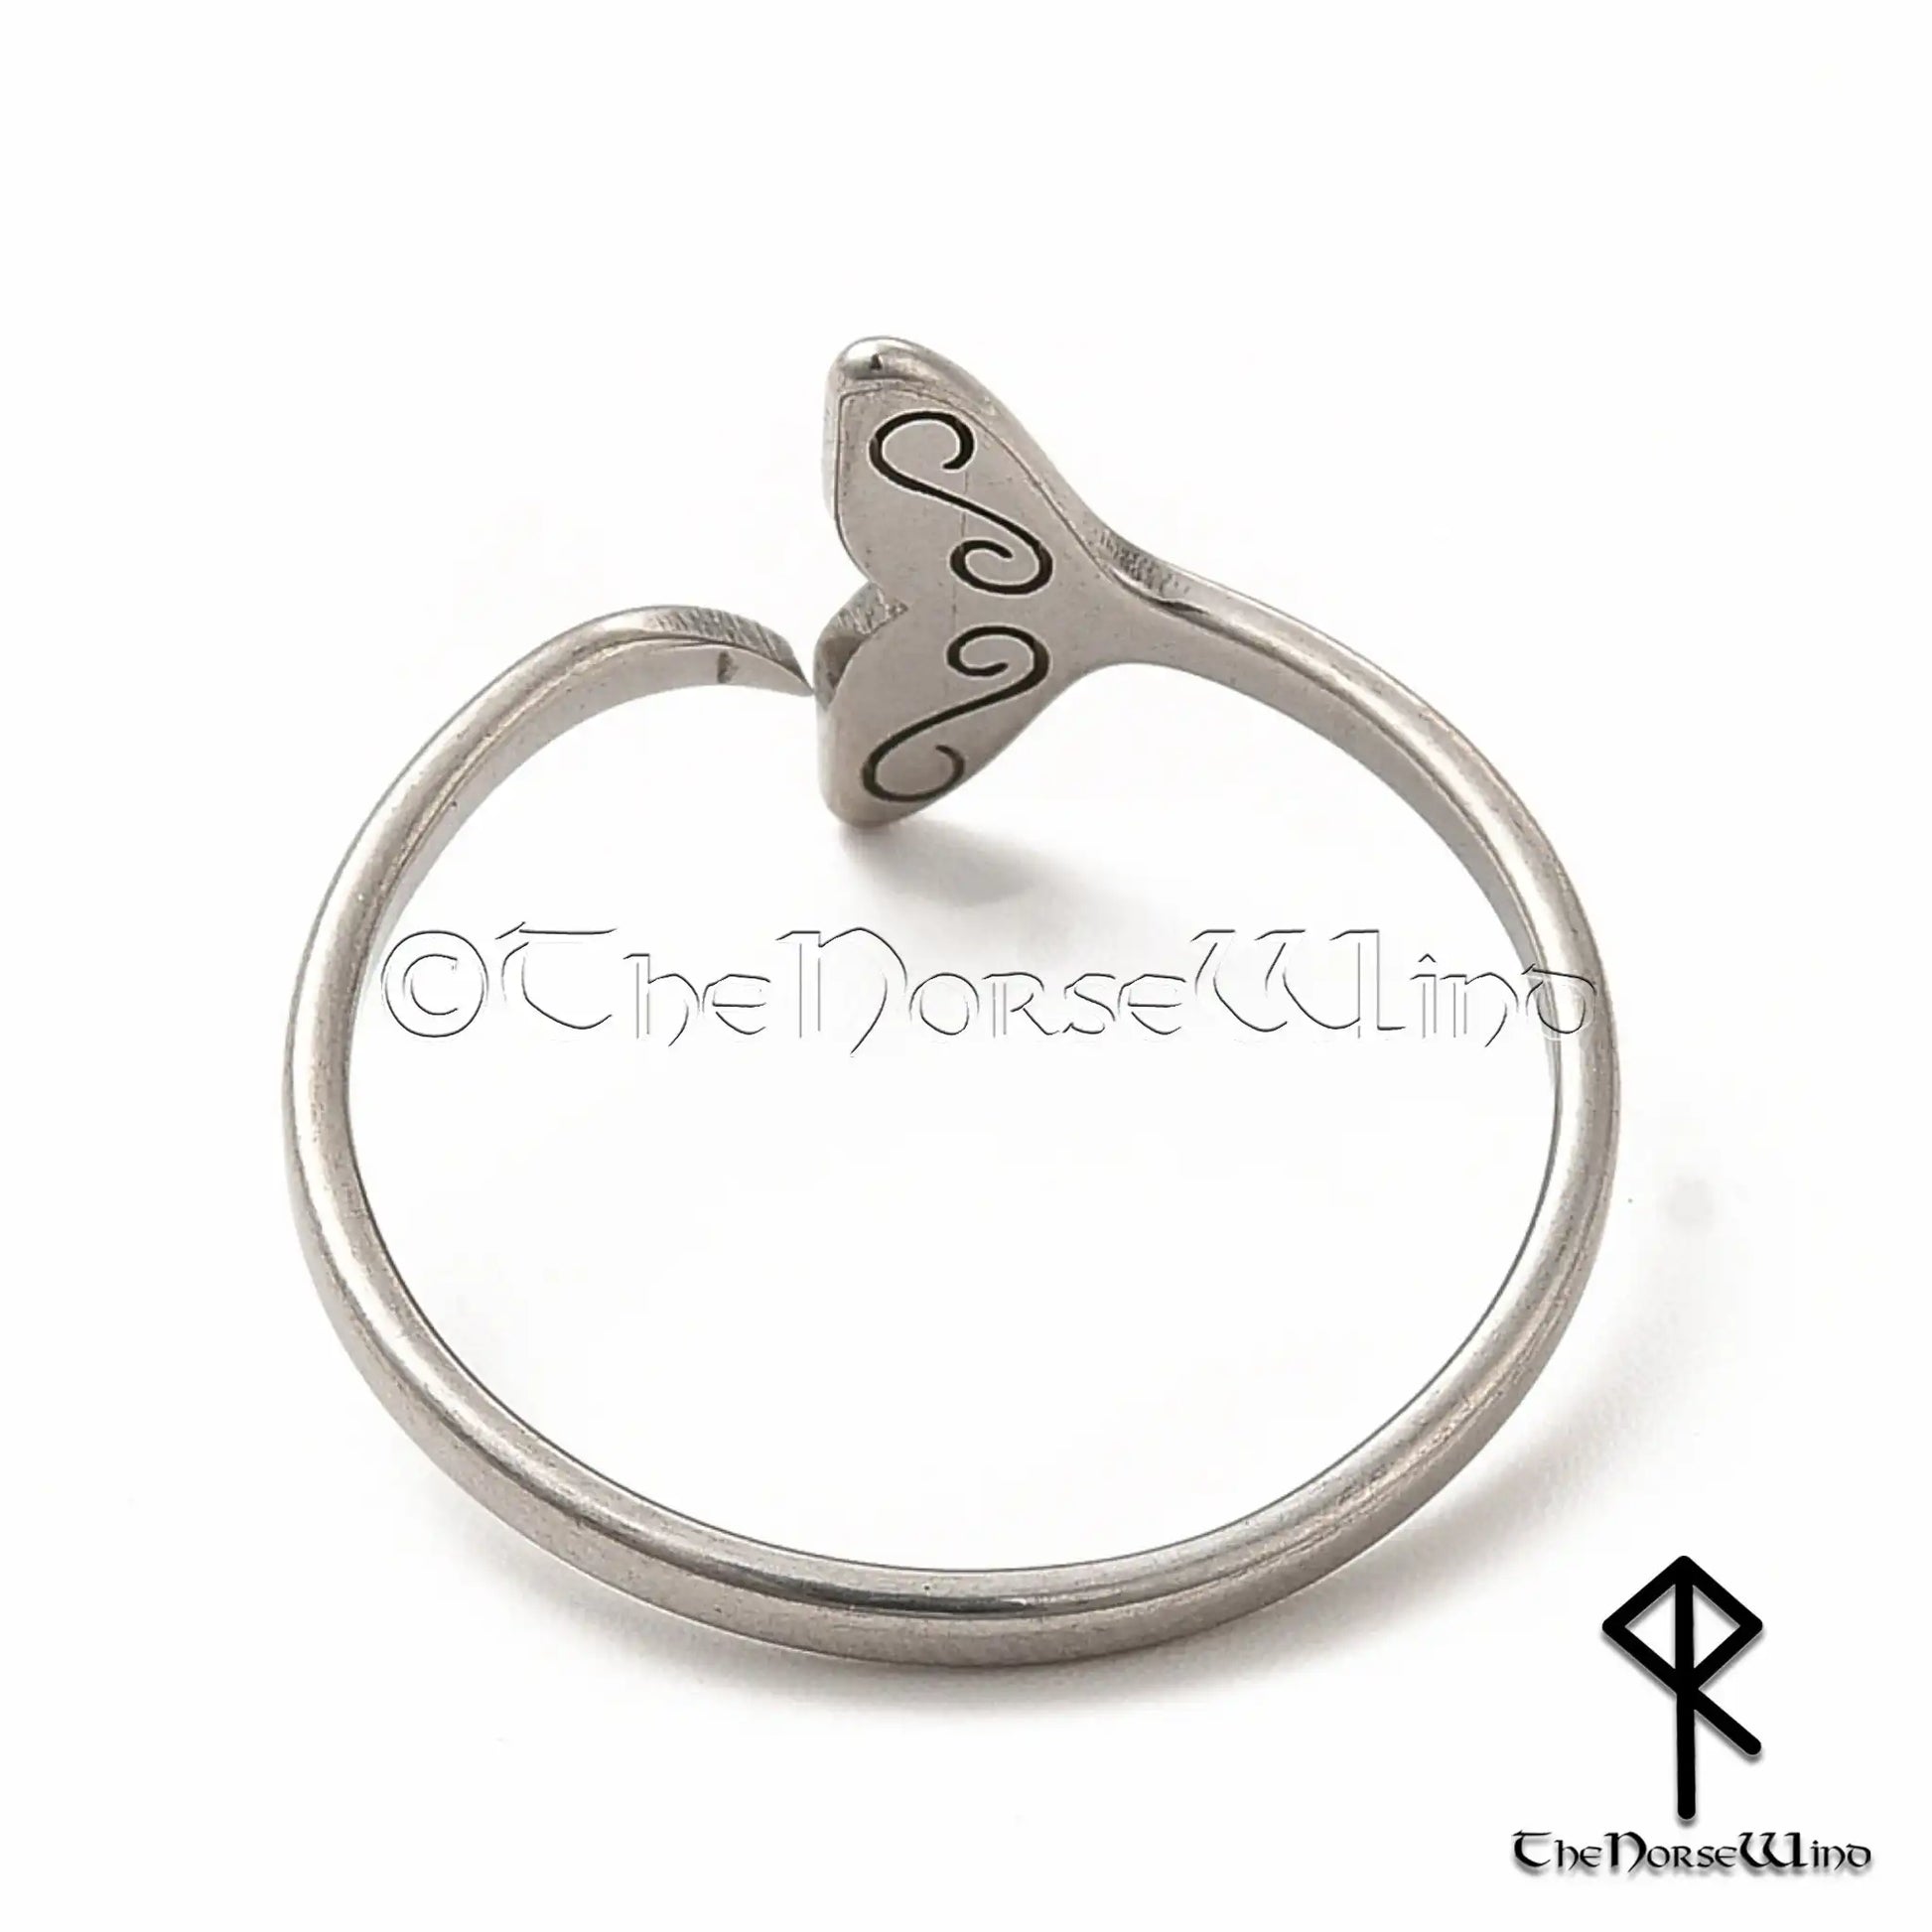 Norse Whale Tail Ring - Stainless Steel Adjustable Women's Viking Jewelry